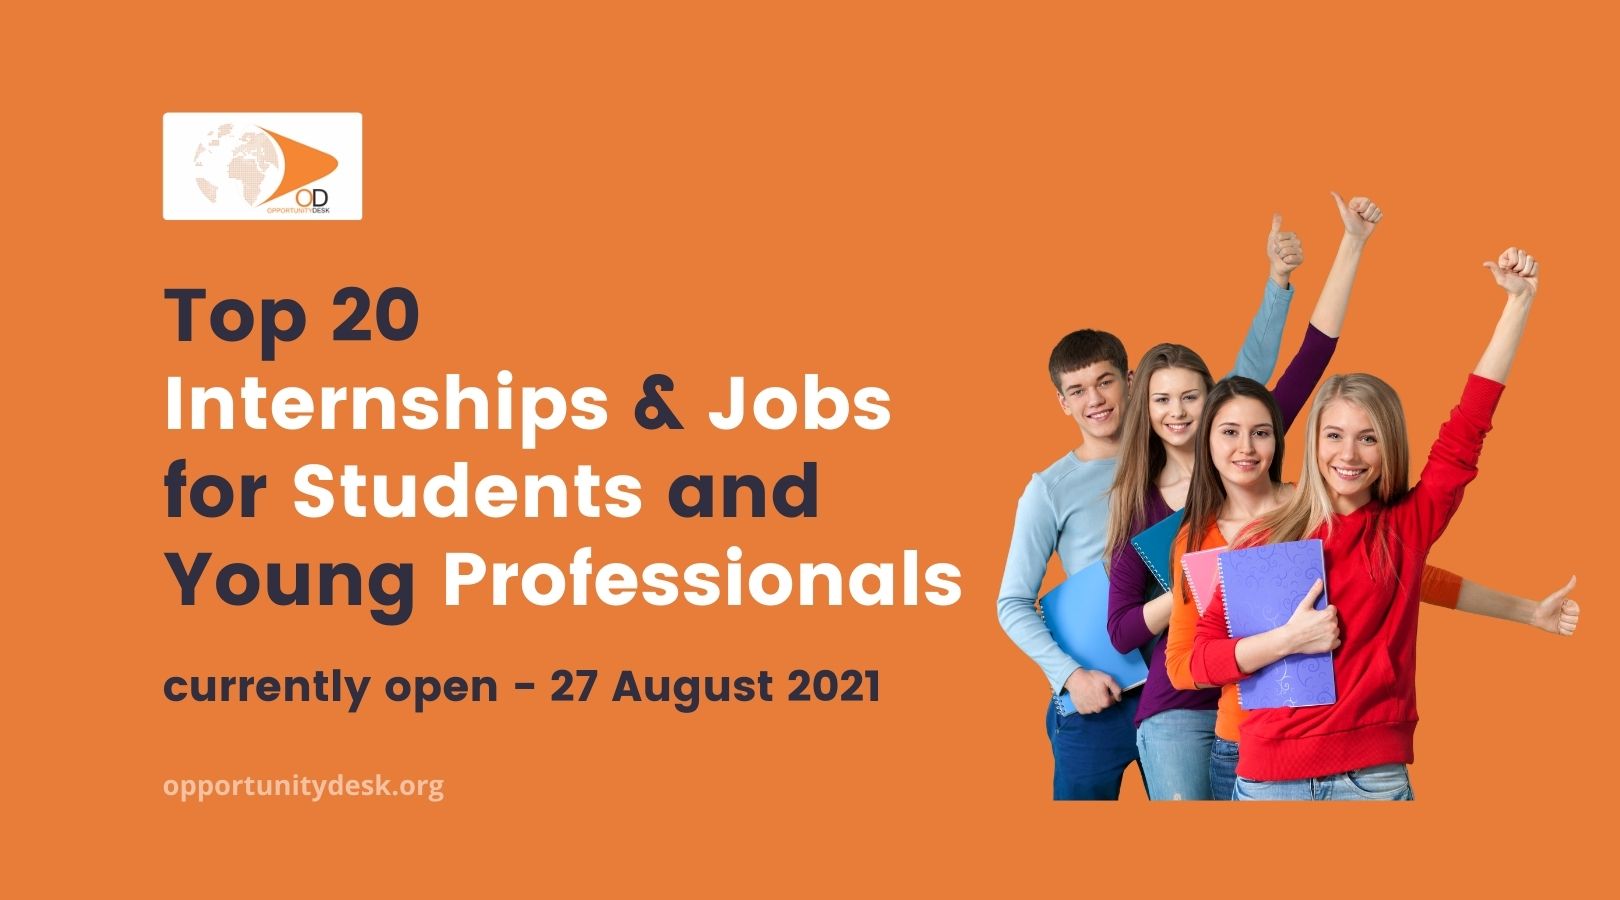 20 Internships and Jobs for Students and Young Professionals currently open – August 27, 2021